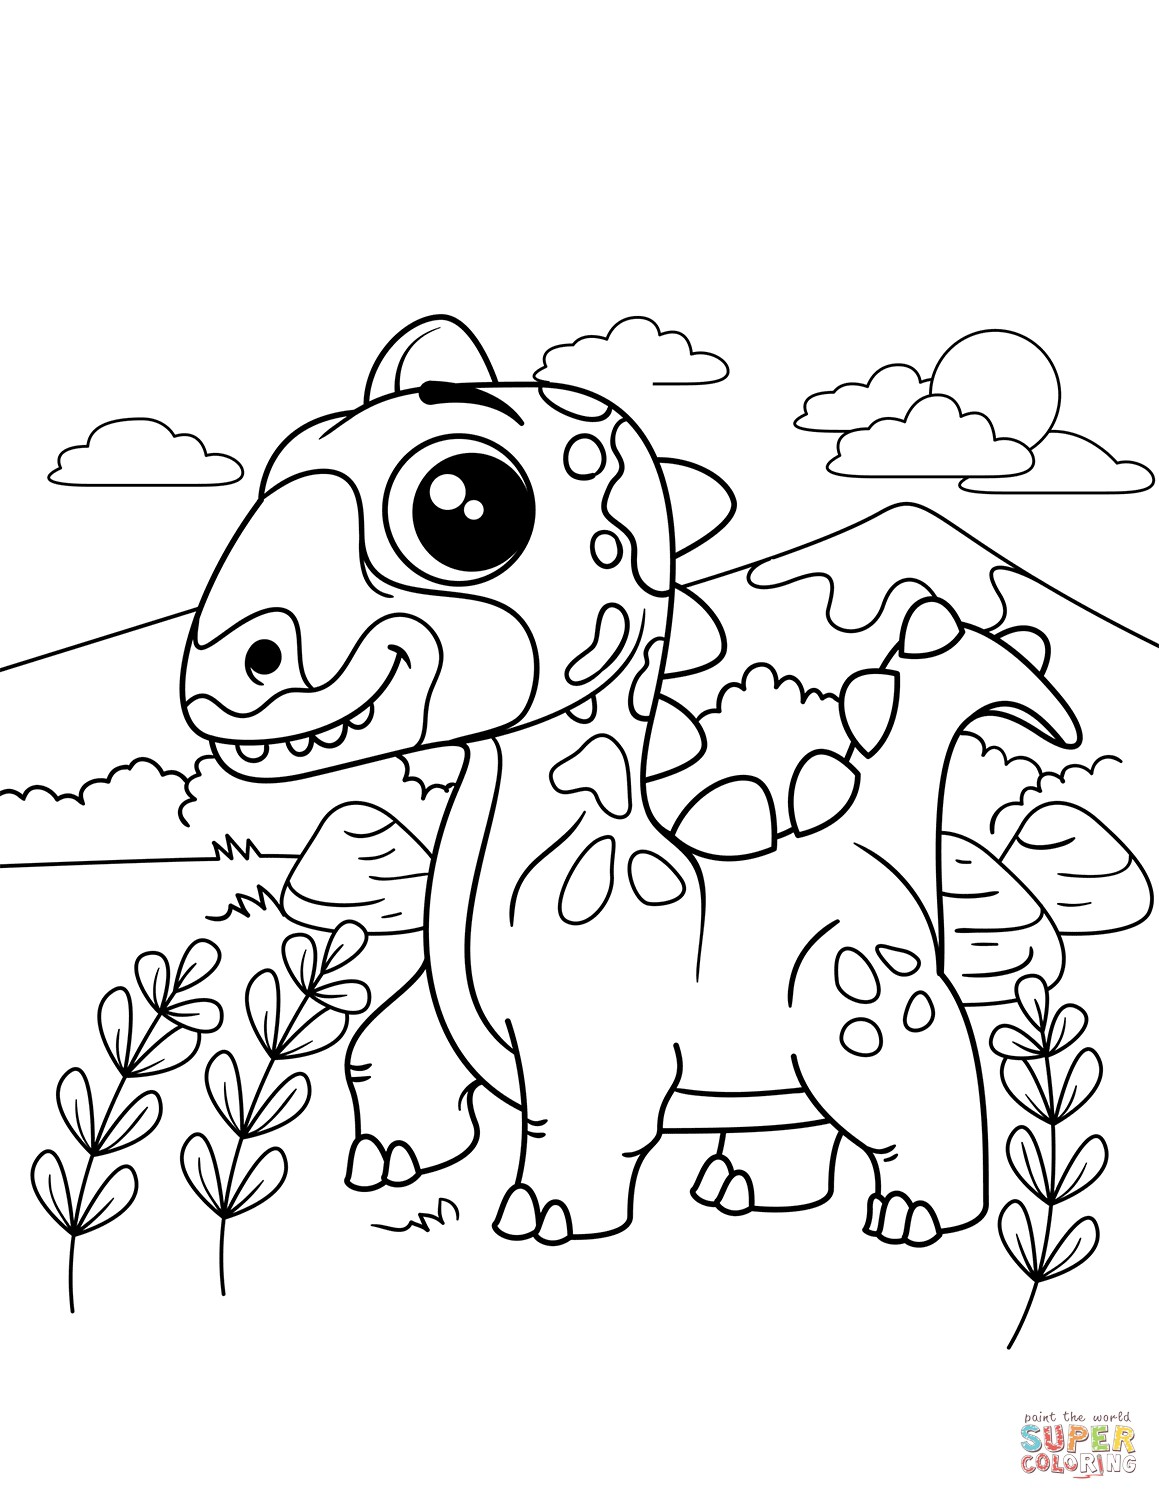 Fresh cute children coloring pages 8